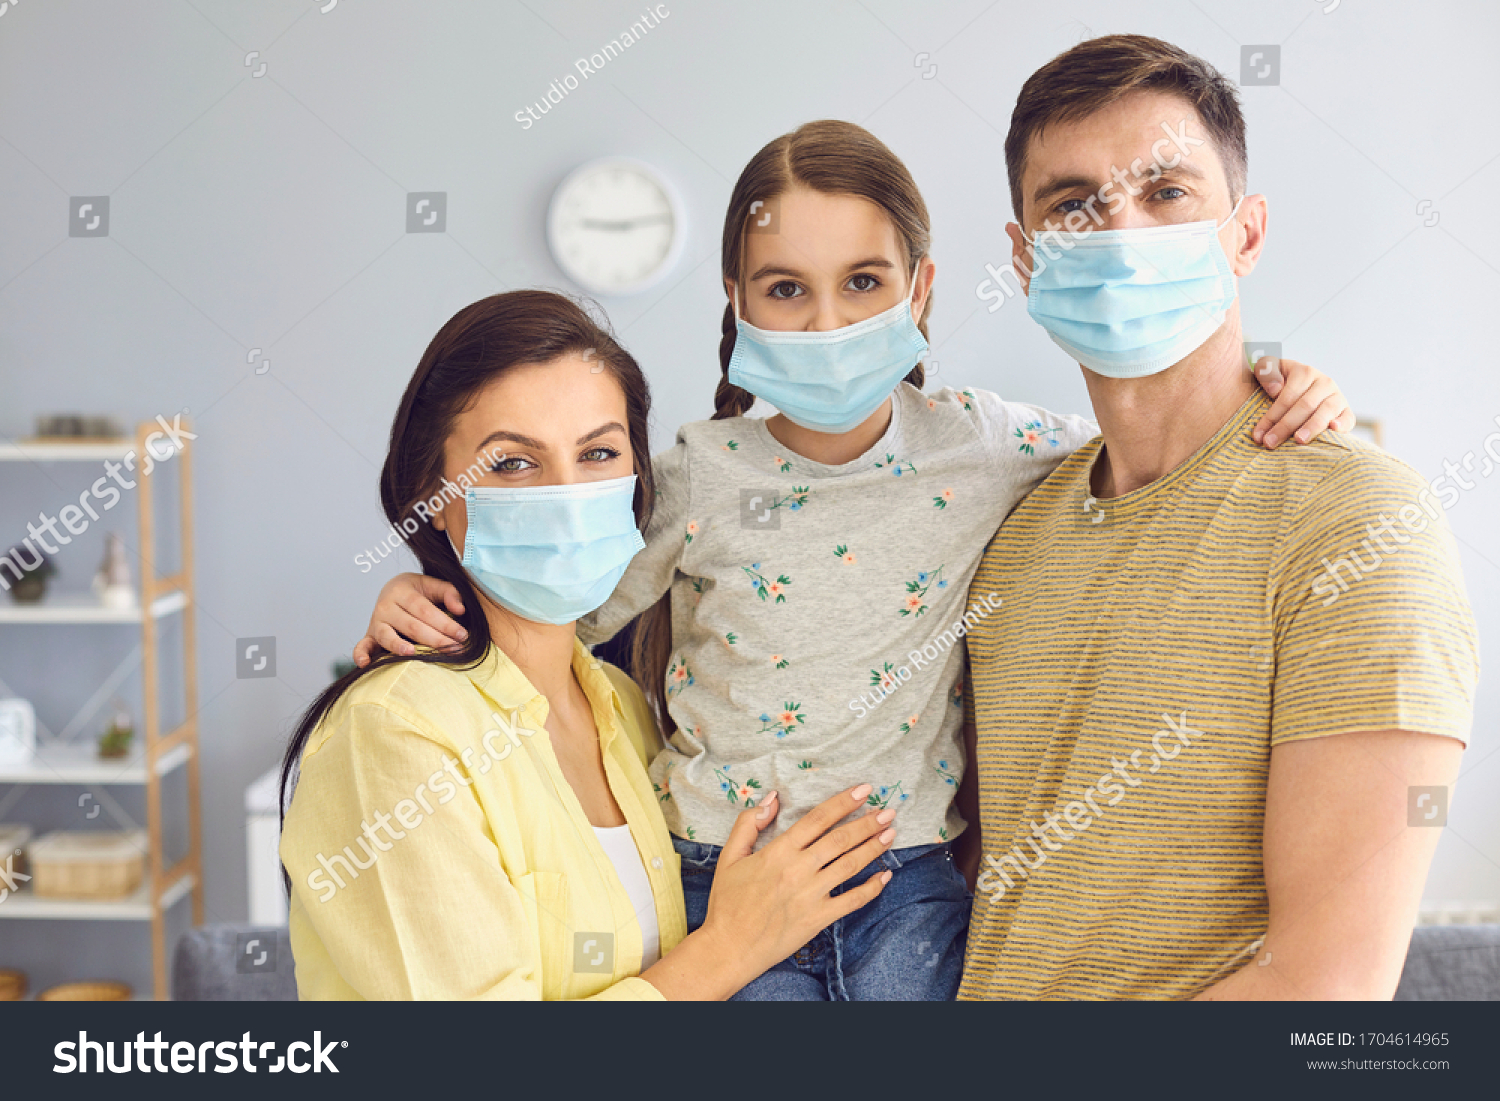 Family in medical masks on the face looks at the camera while standing in the room at home. #1704614965